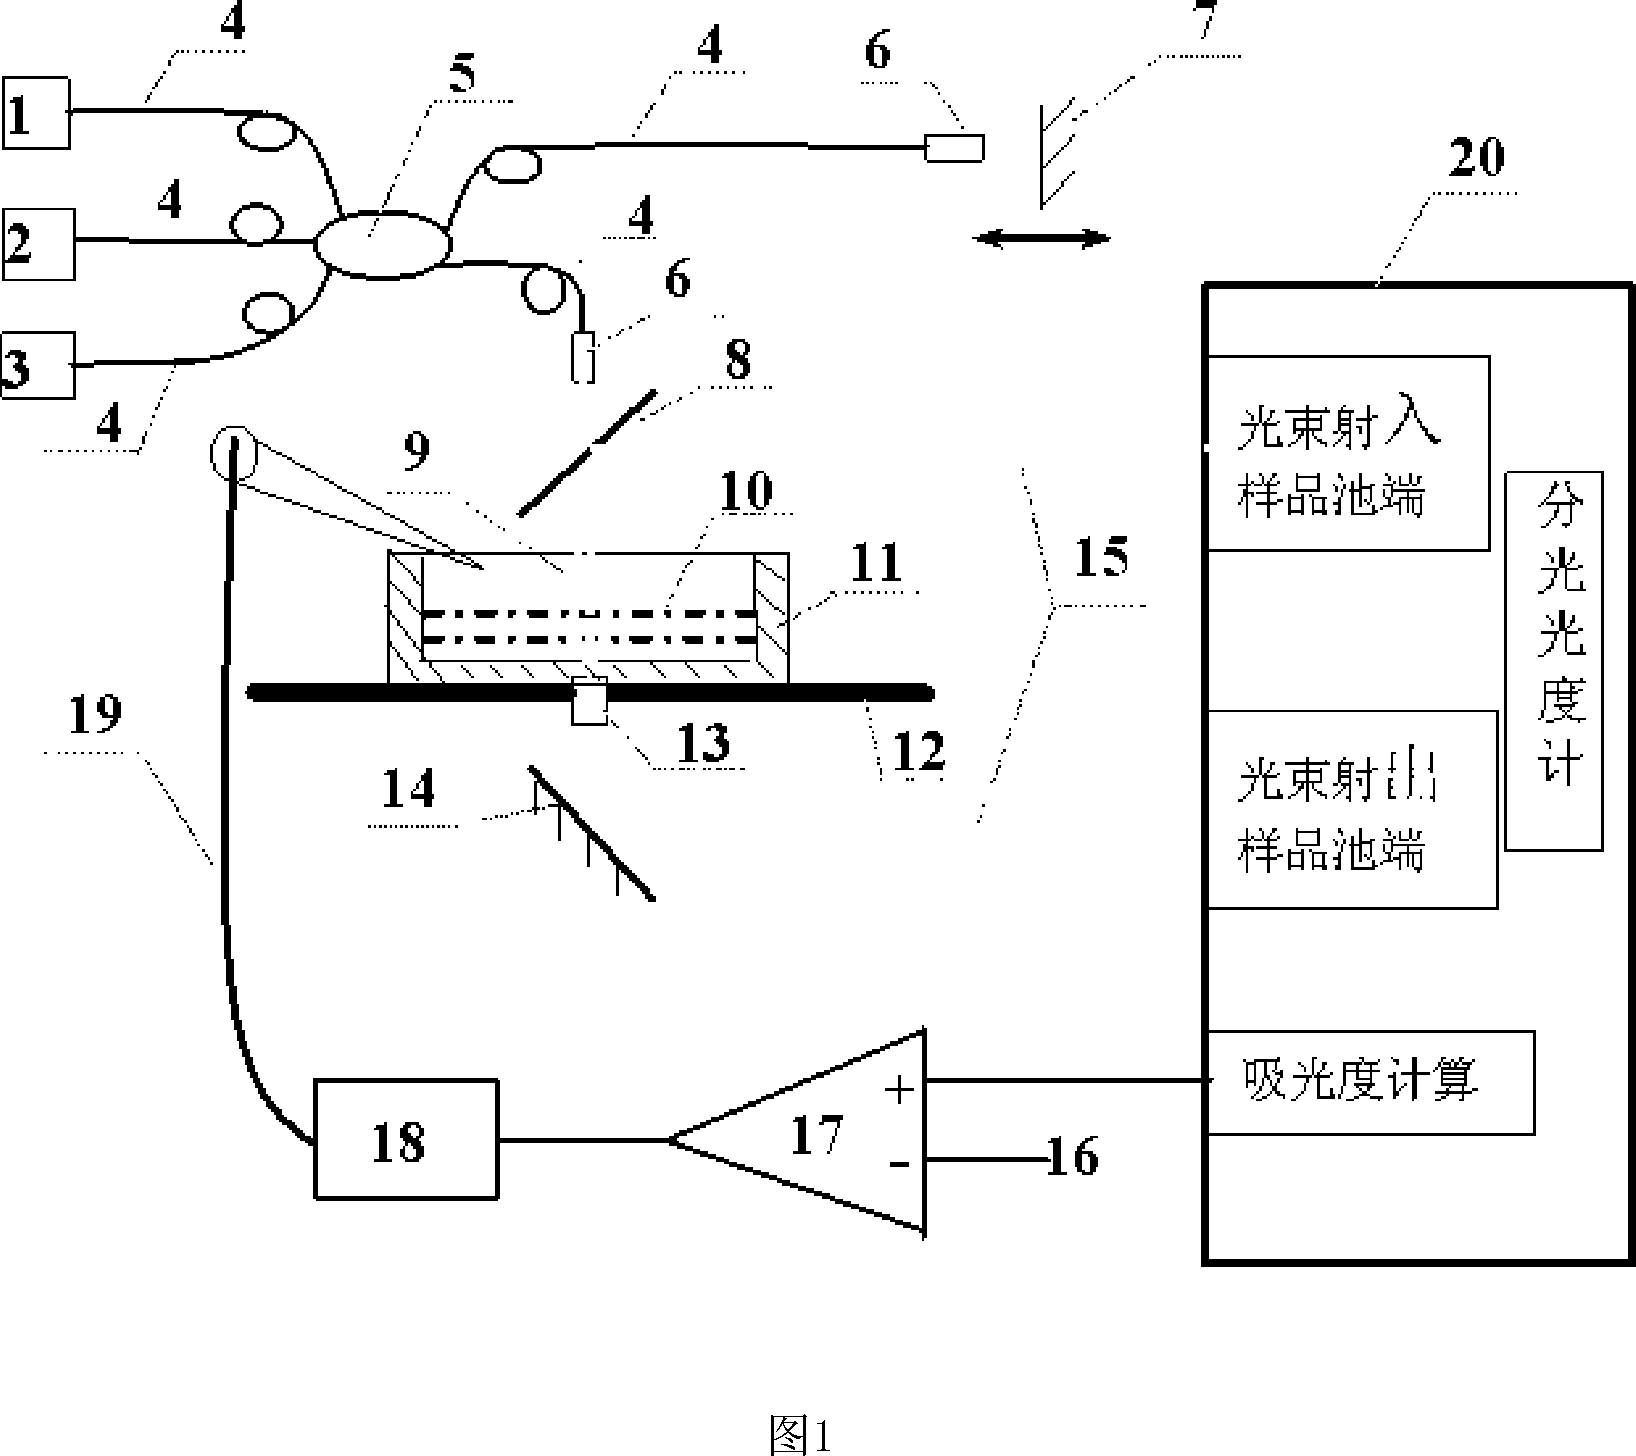 Process of applying white light interference system in measuring variable light absorbing wavelength of spectrophotometer